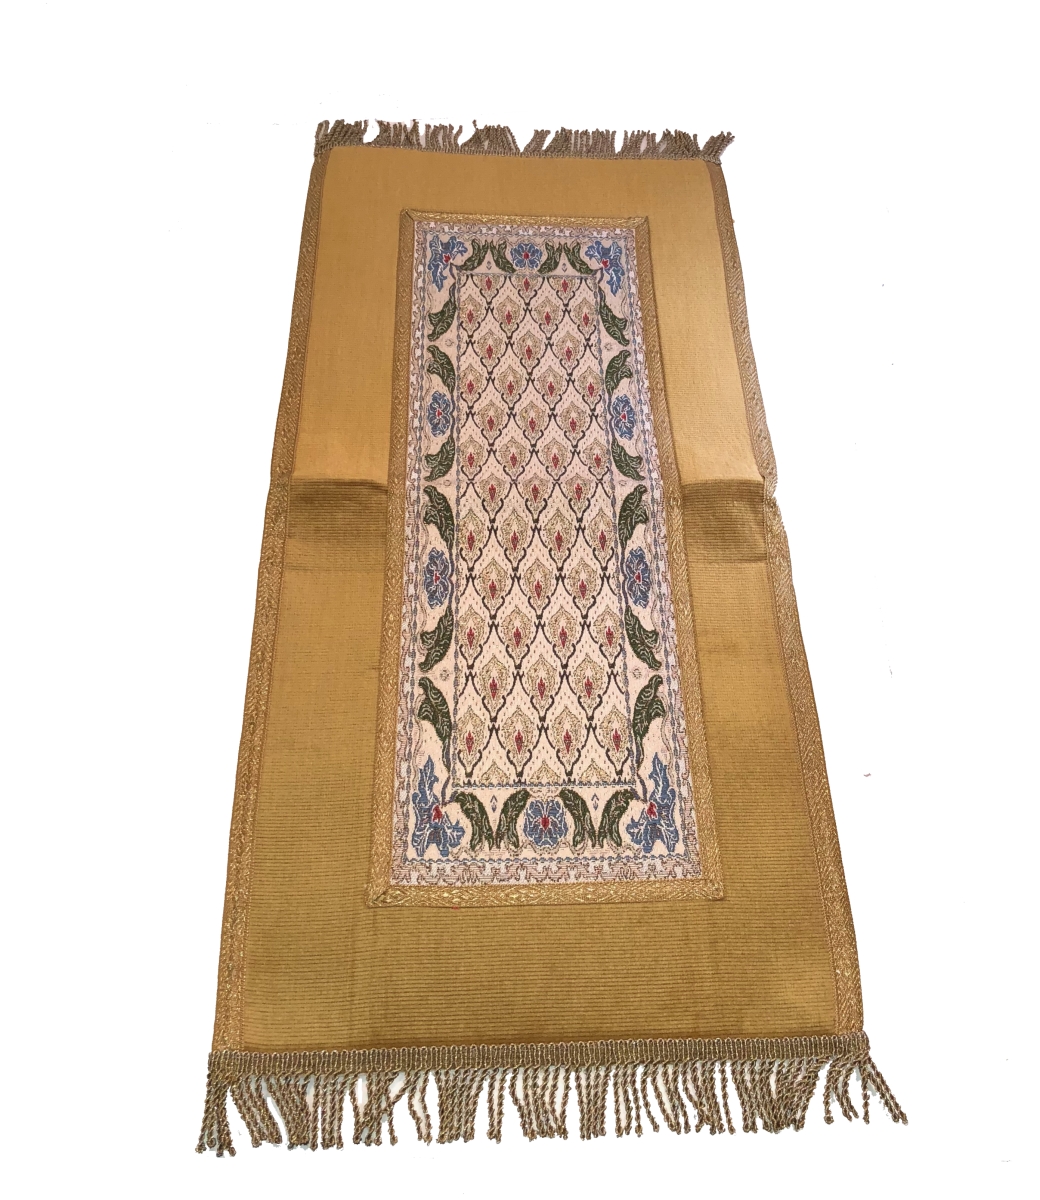 Fou1252gld 12 X 52 Belgium Fouquete Table Runner, Gold